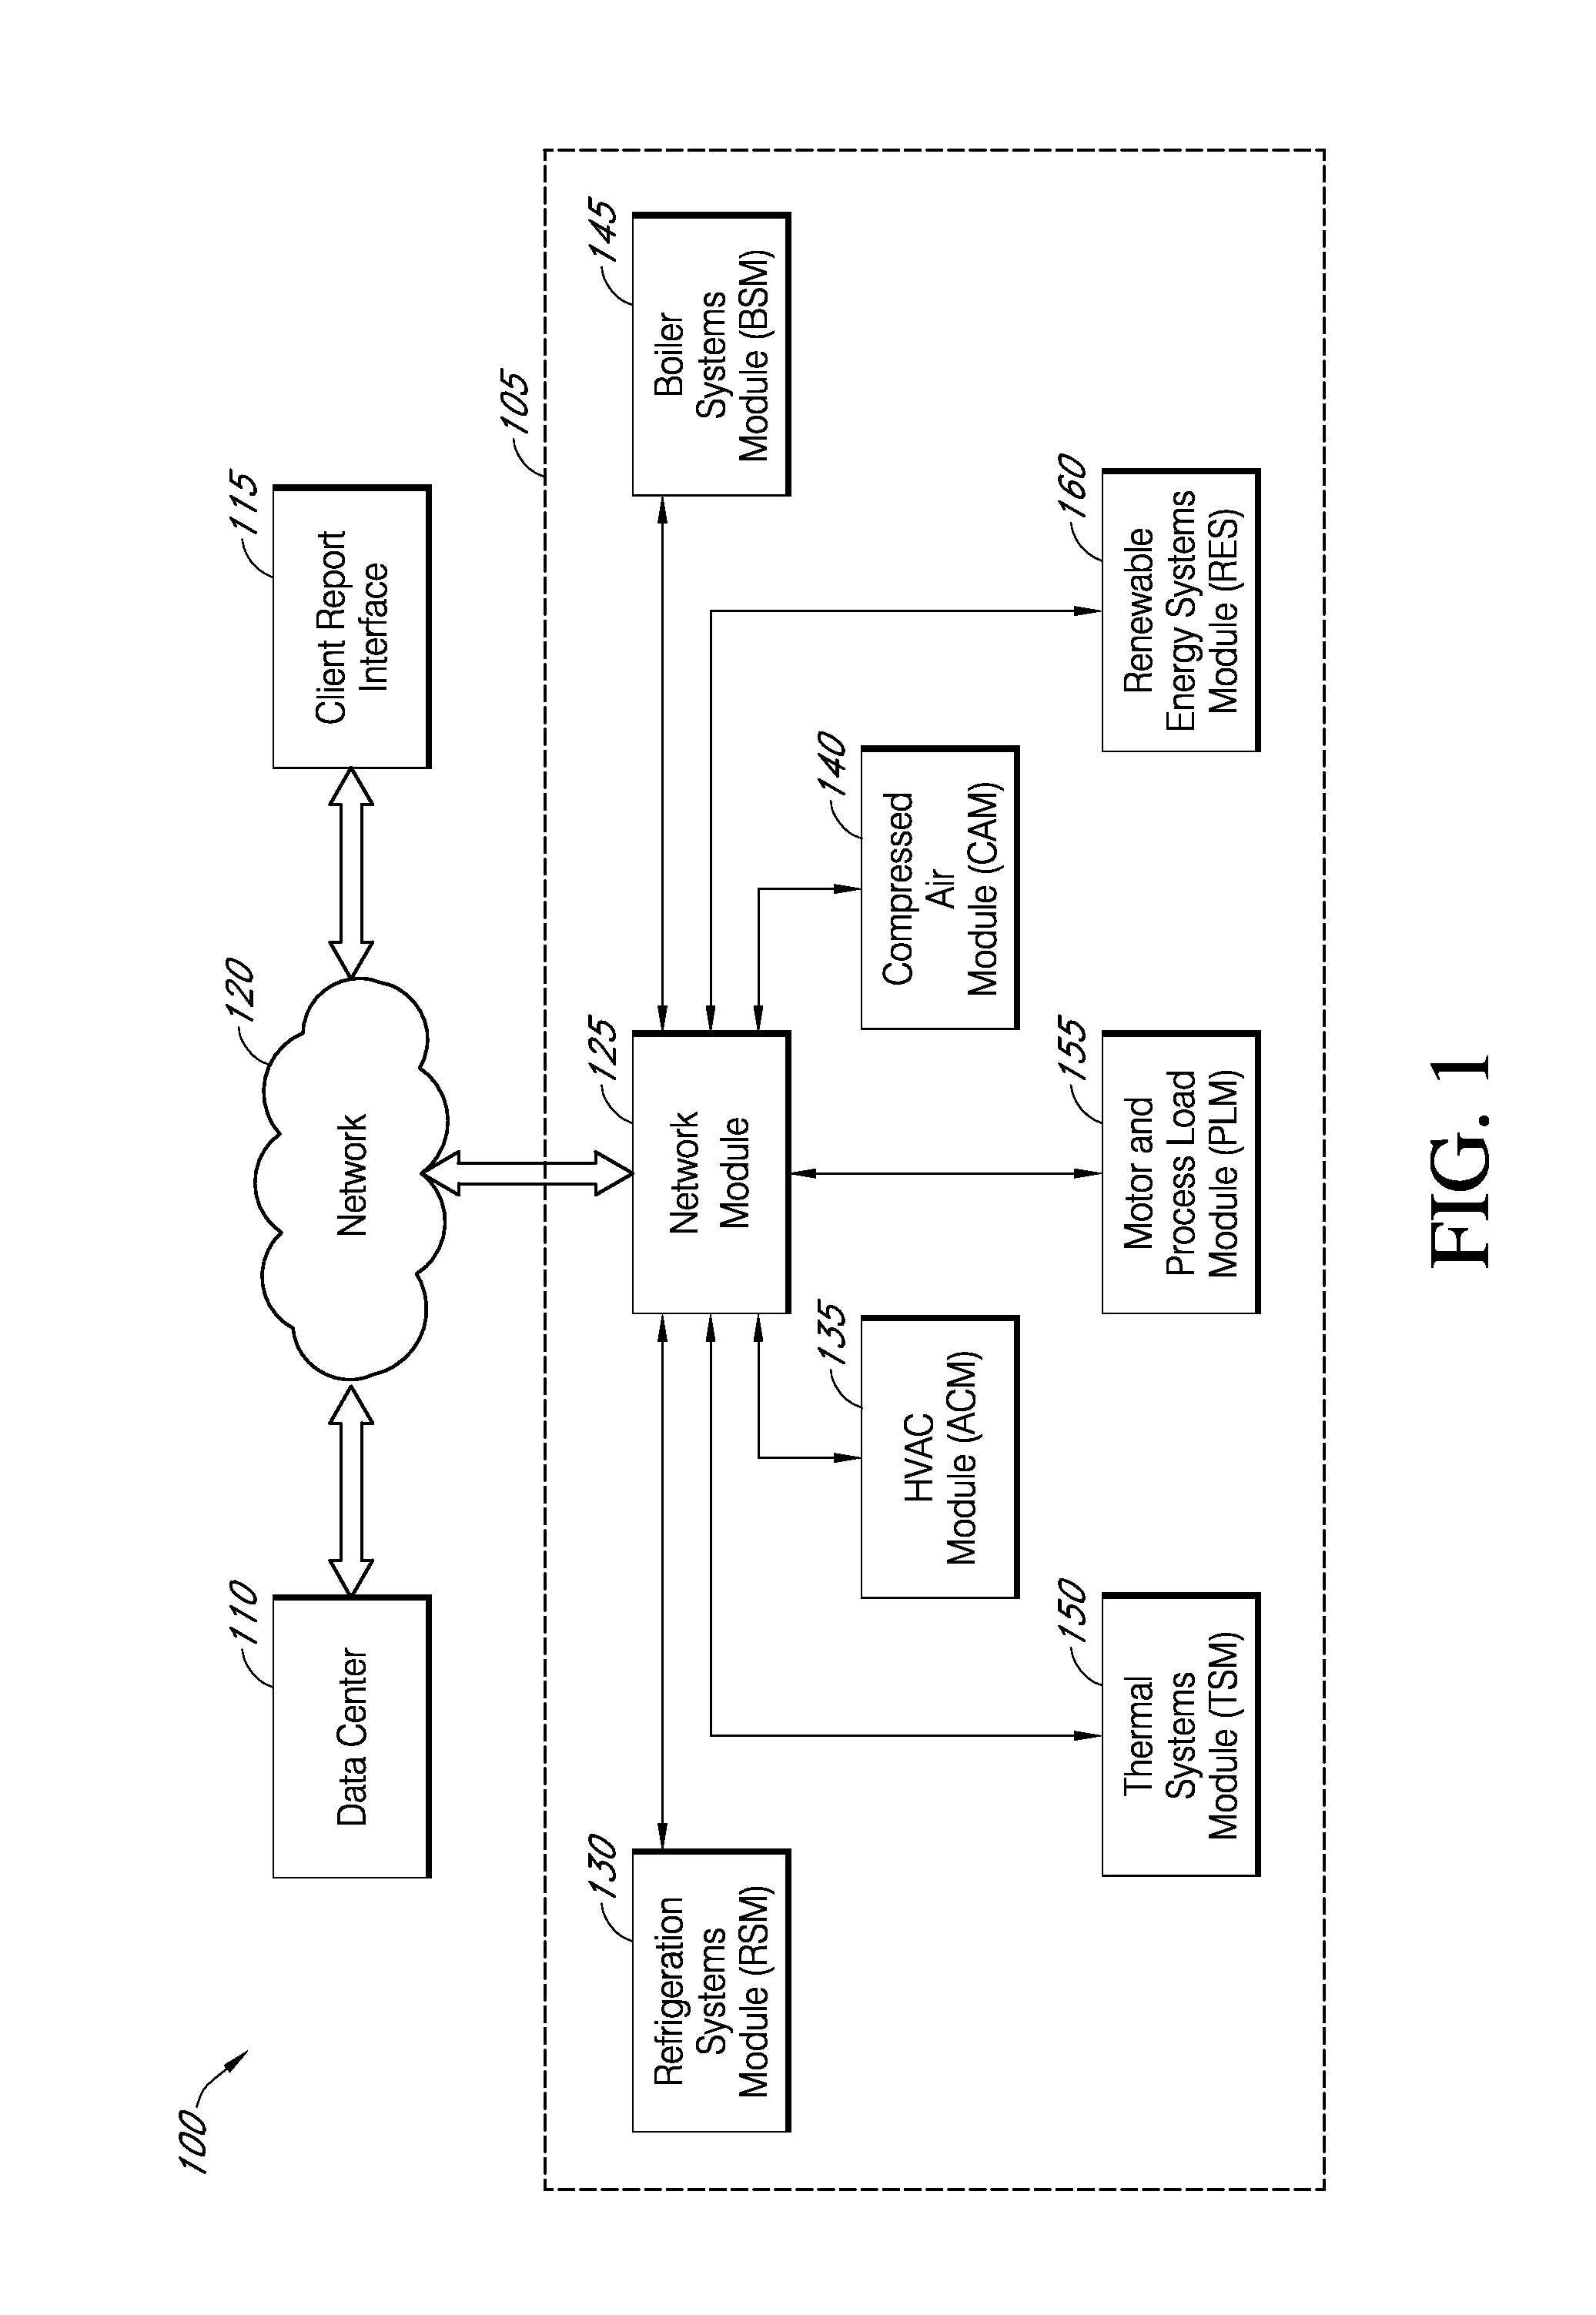 Systems and methods for assessing and optimizing energy use and environmental impact